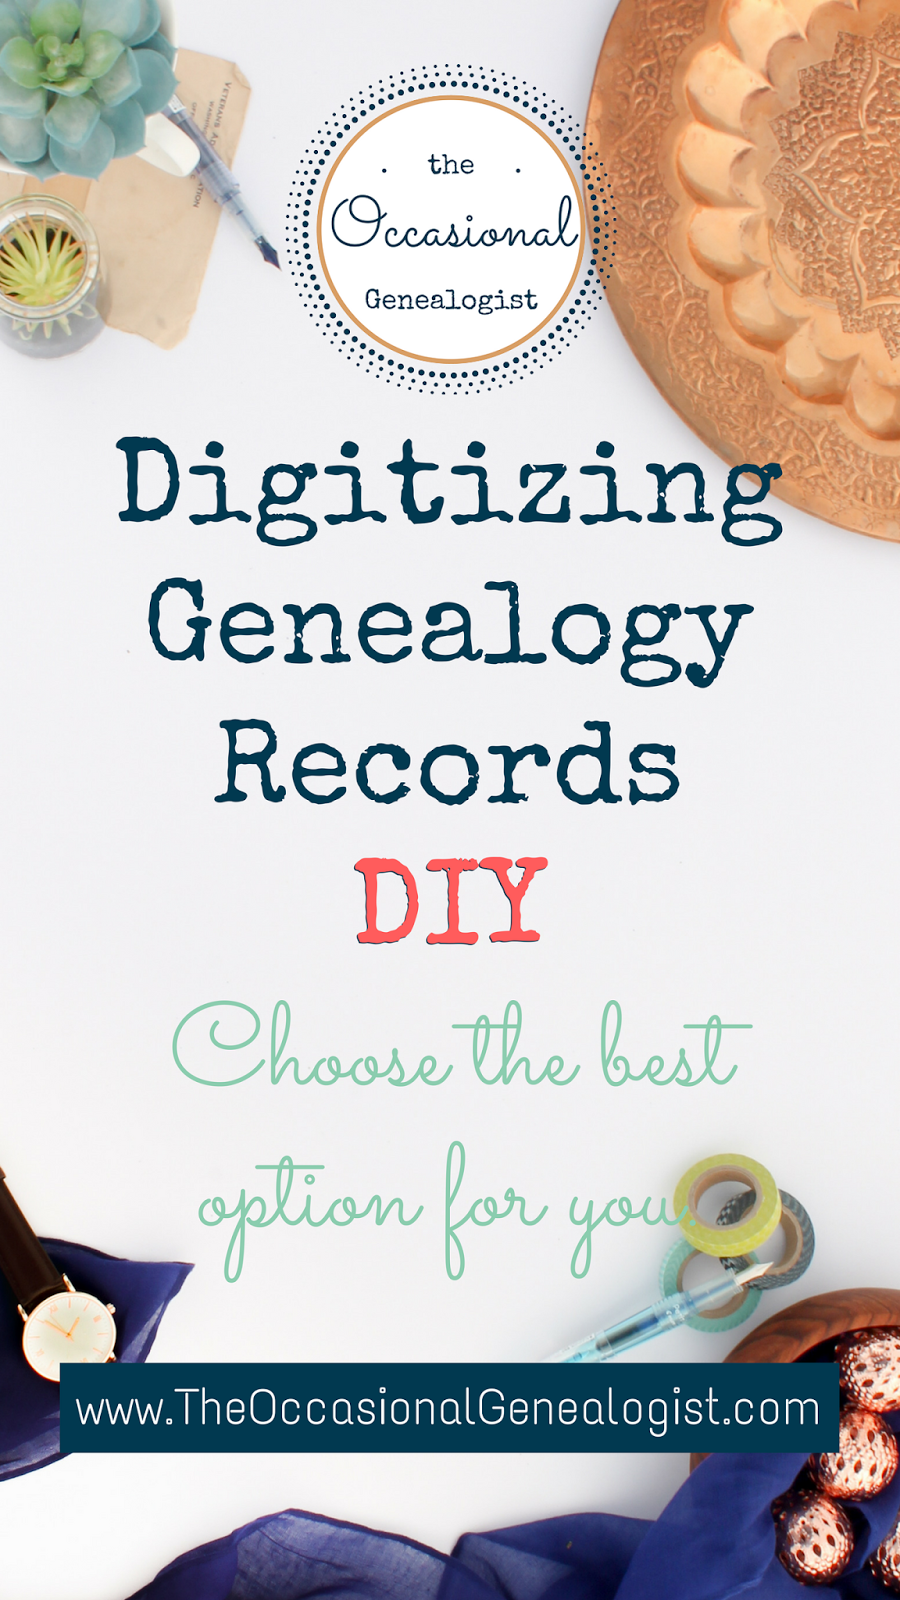 Scanner or digital camera, which is best for family historians wanting to digitize genealogy records? How do you decide? | The Occasional Genealogist